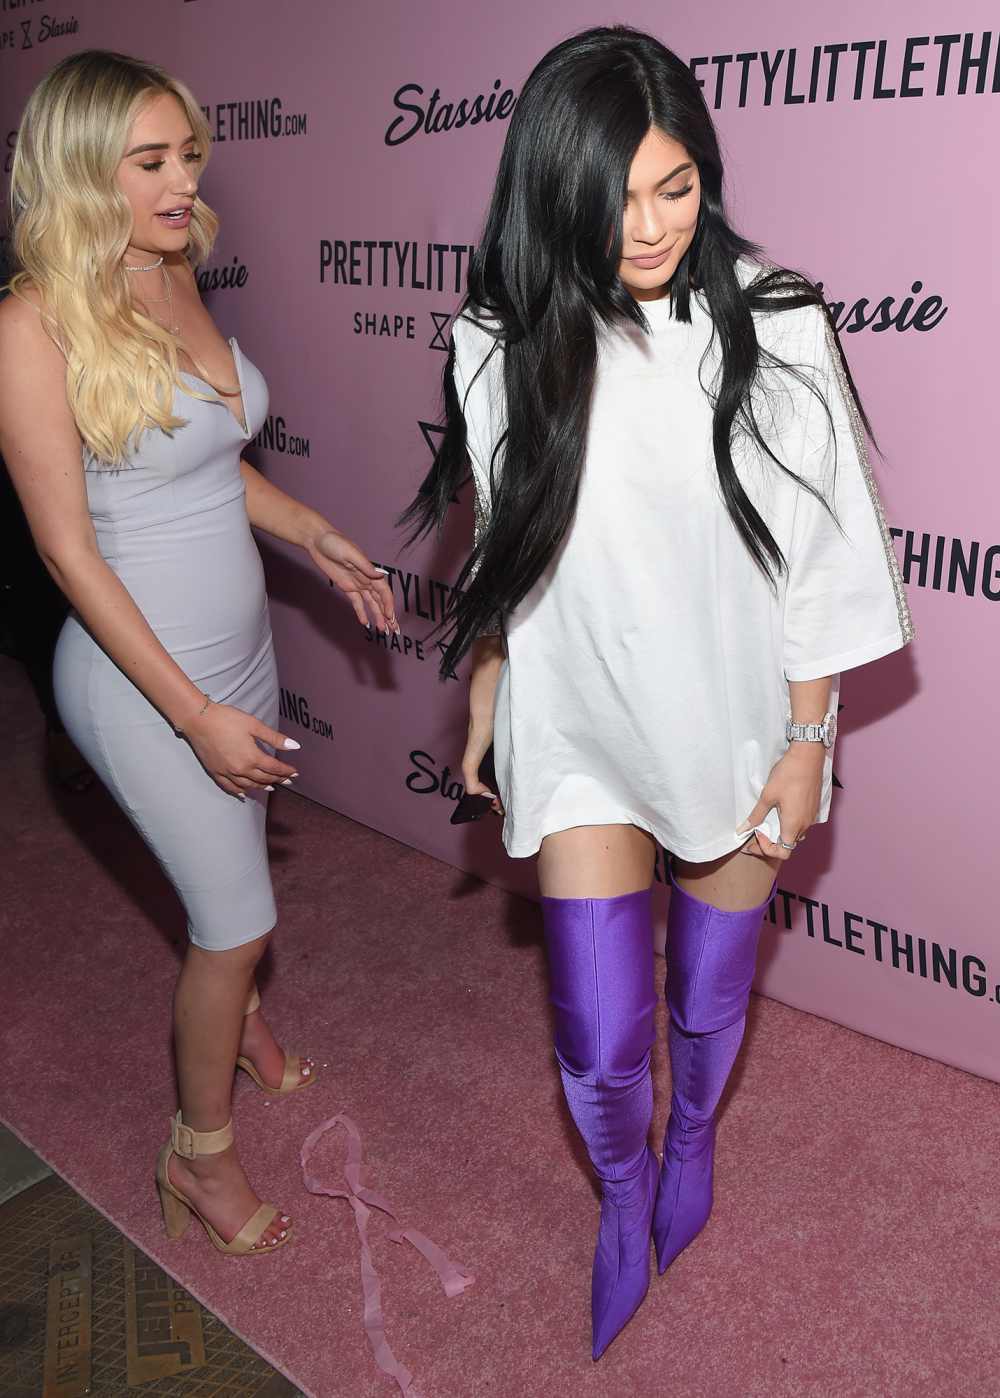 5 Things to Know About Kylie Jenner’s Friend Stassie Karanikolaou